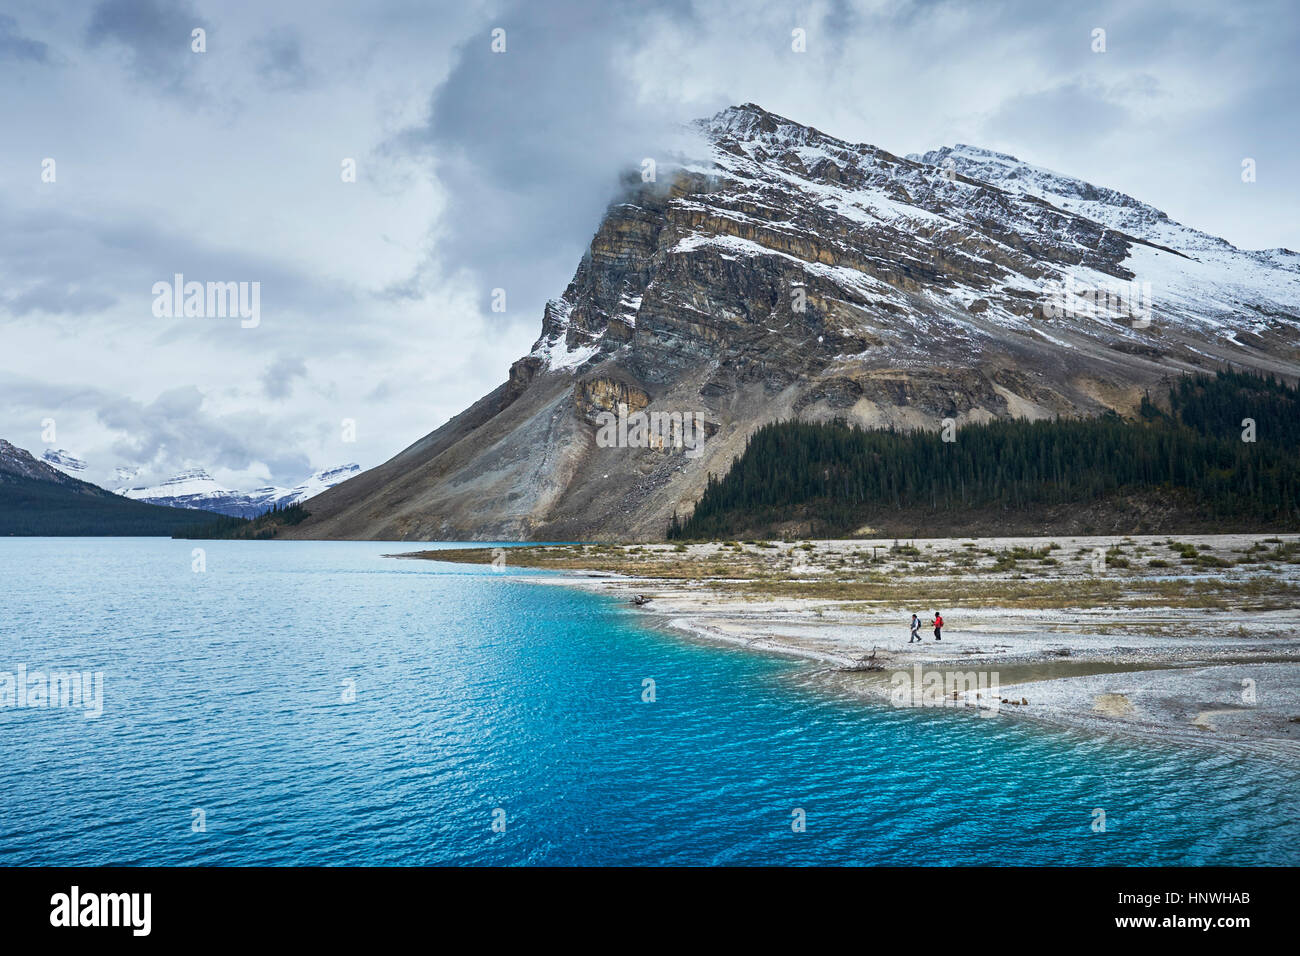 Hikers hiking by lake and snow capped mountains, Banff, Alberta, Canada Stock Photo